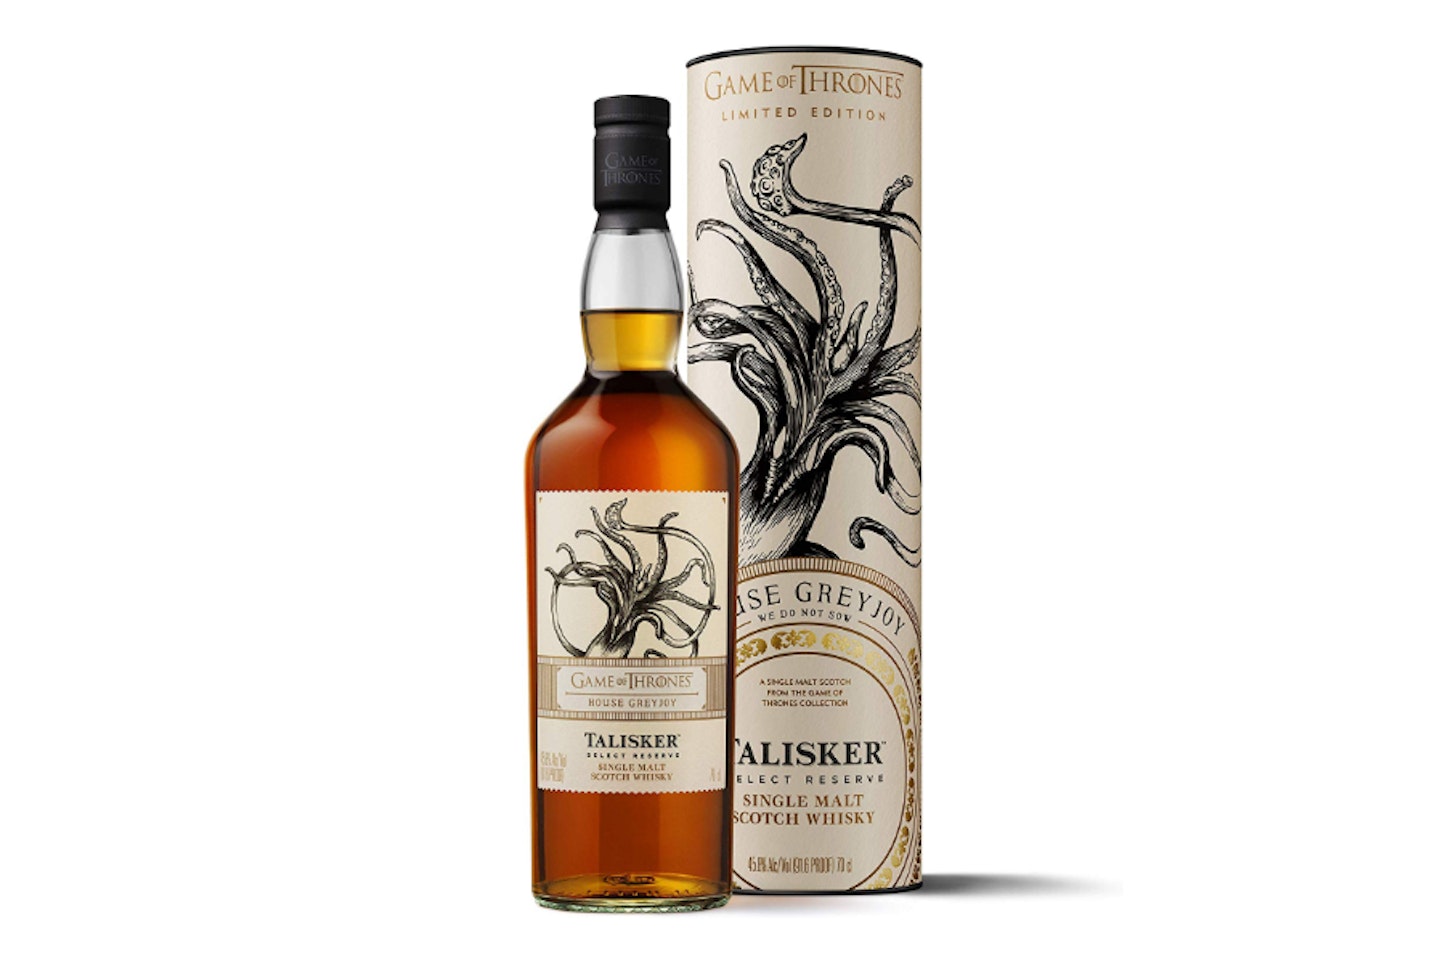 Game of Thrones House Greyjoy – Talisker Select Reserve, 700cl, 45.8%, £41.42